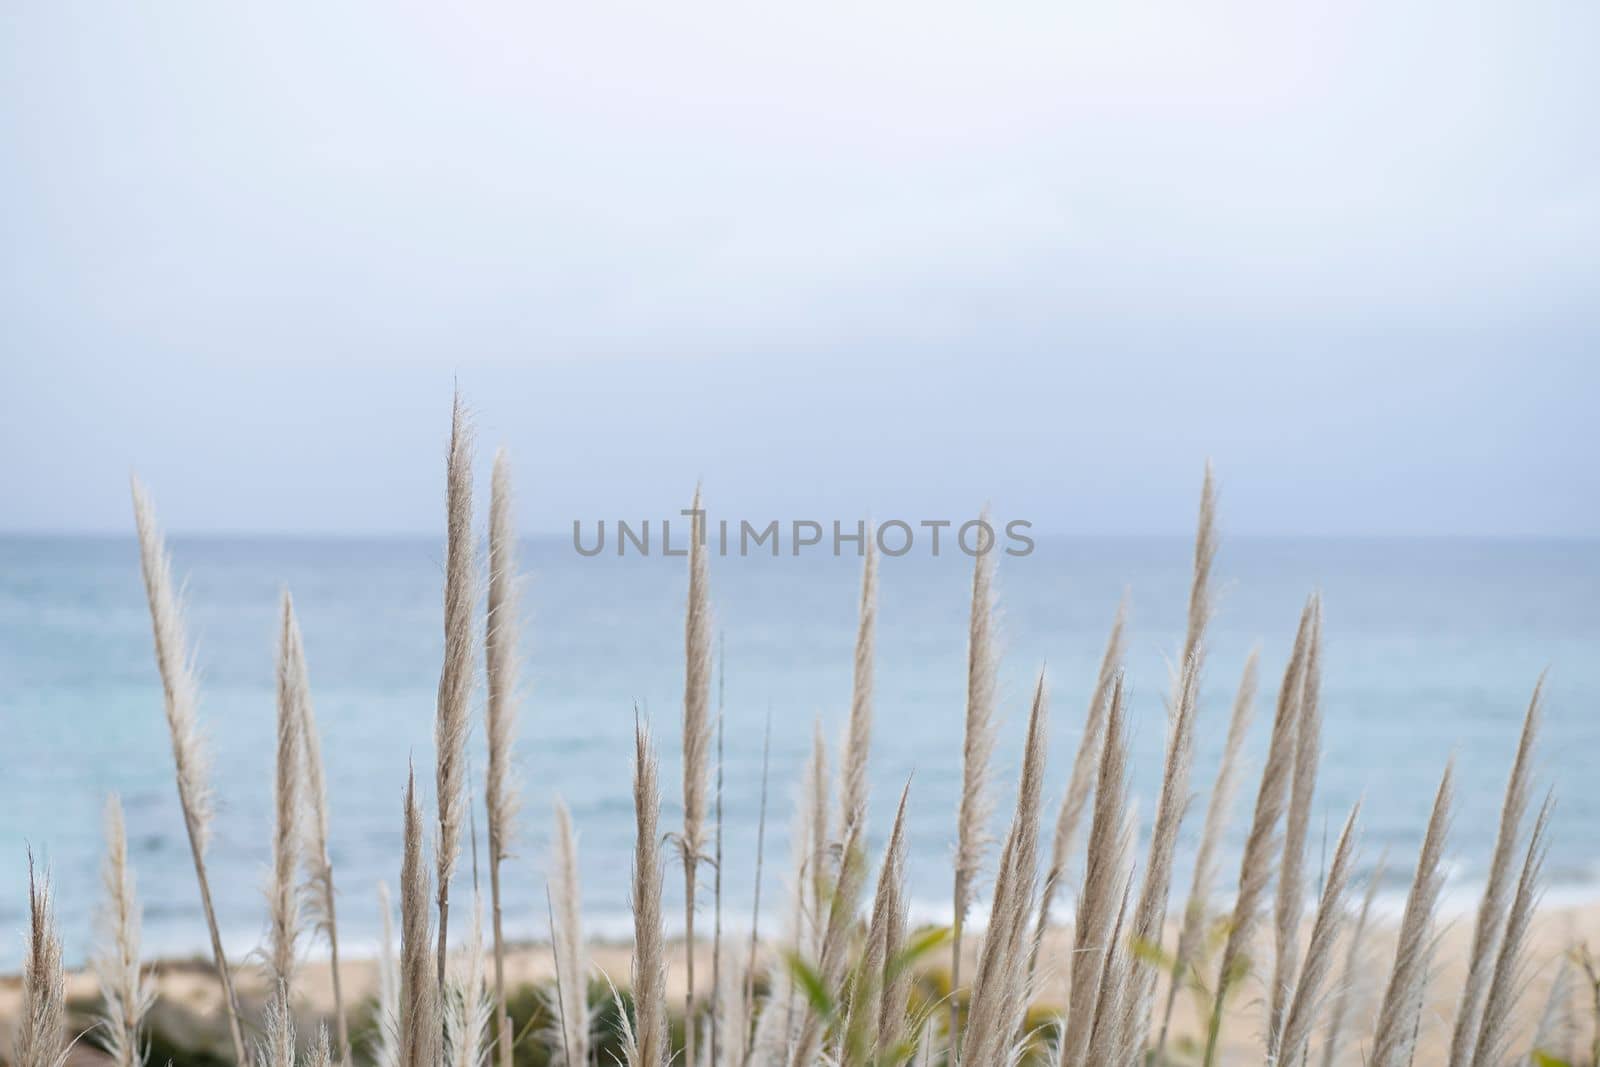 Sky and ocean beach scene with fluffy heads of pampas grass in foreground. Marine view